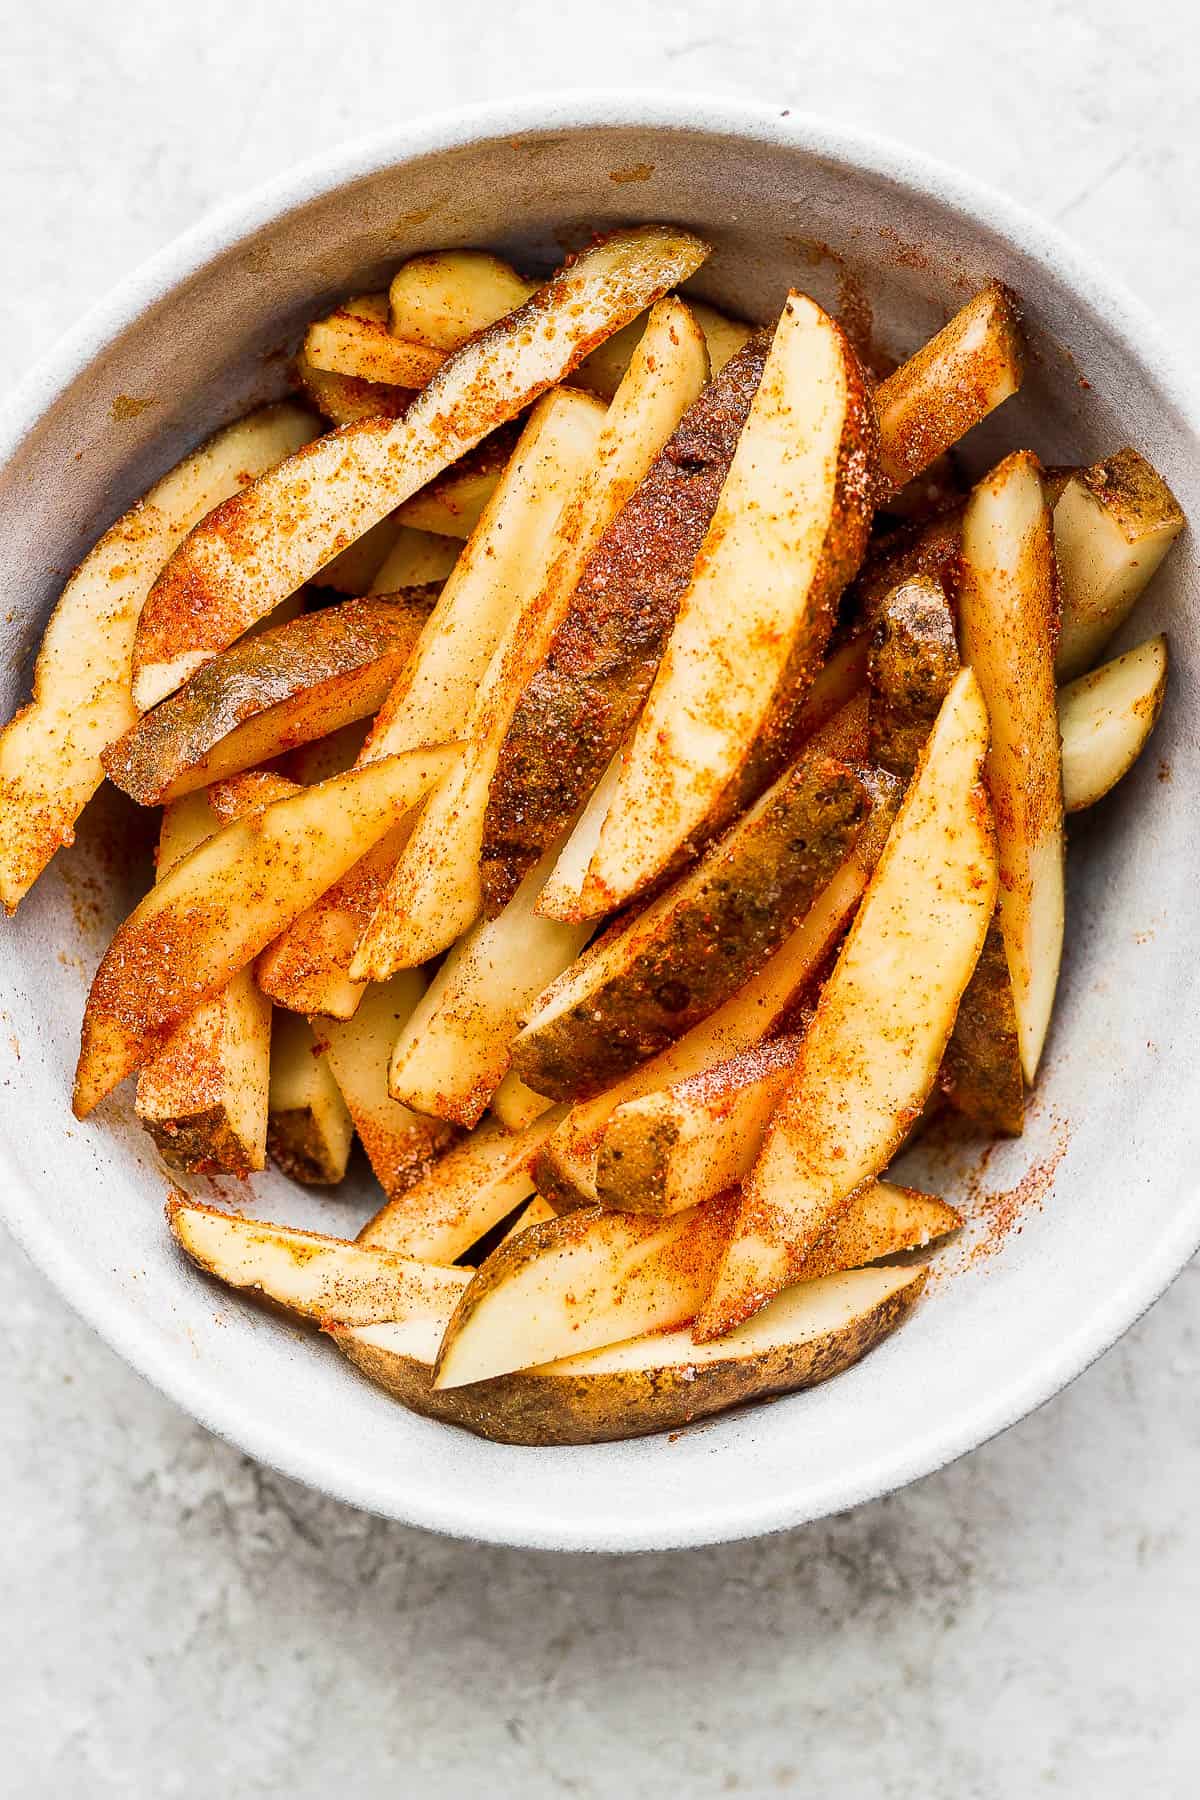 Cooked seasoned potato slices placed into a large bowl